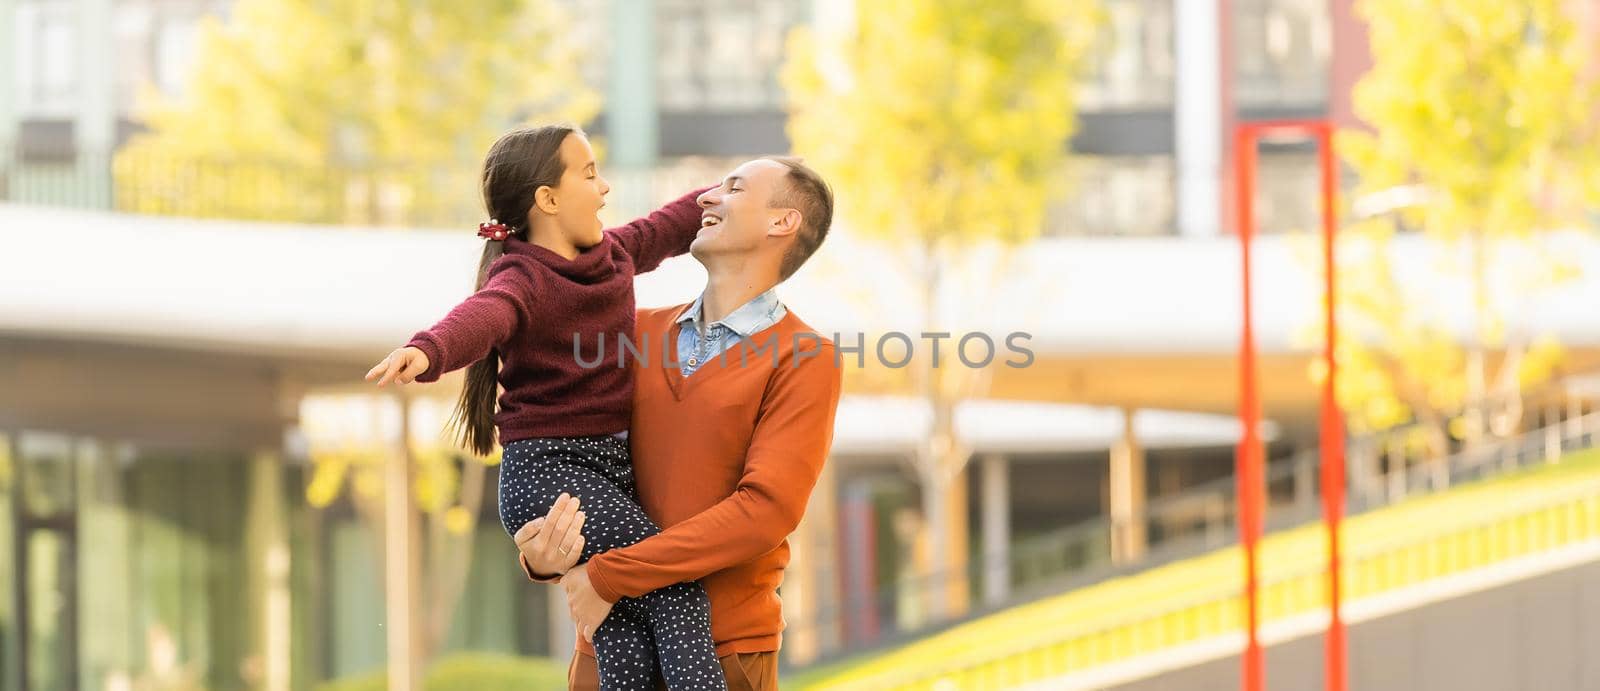 Happy father and daughter walking together in park on an autumns day.